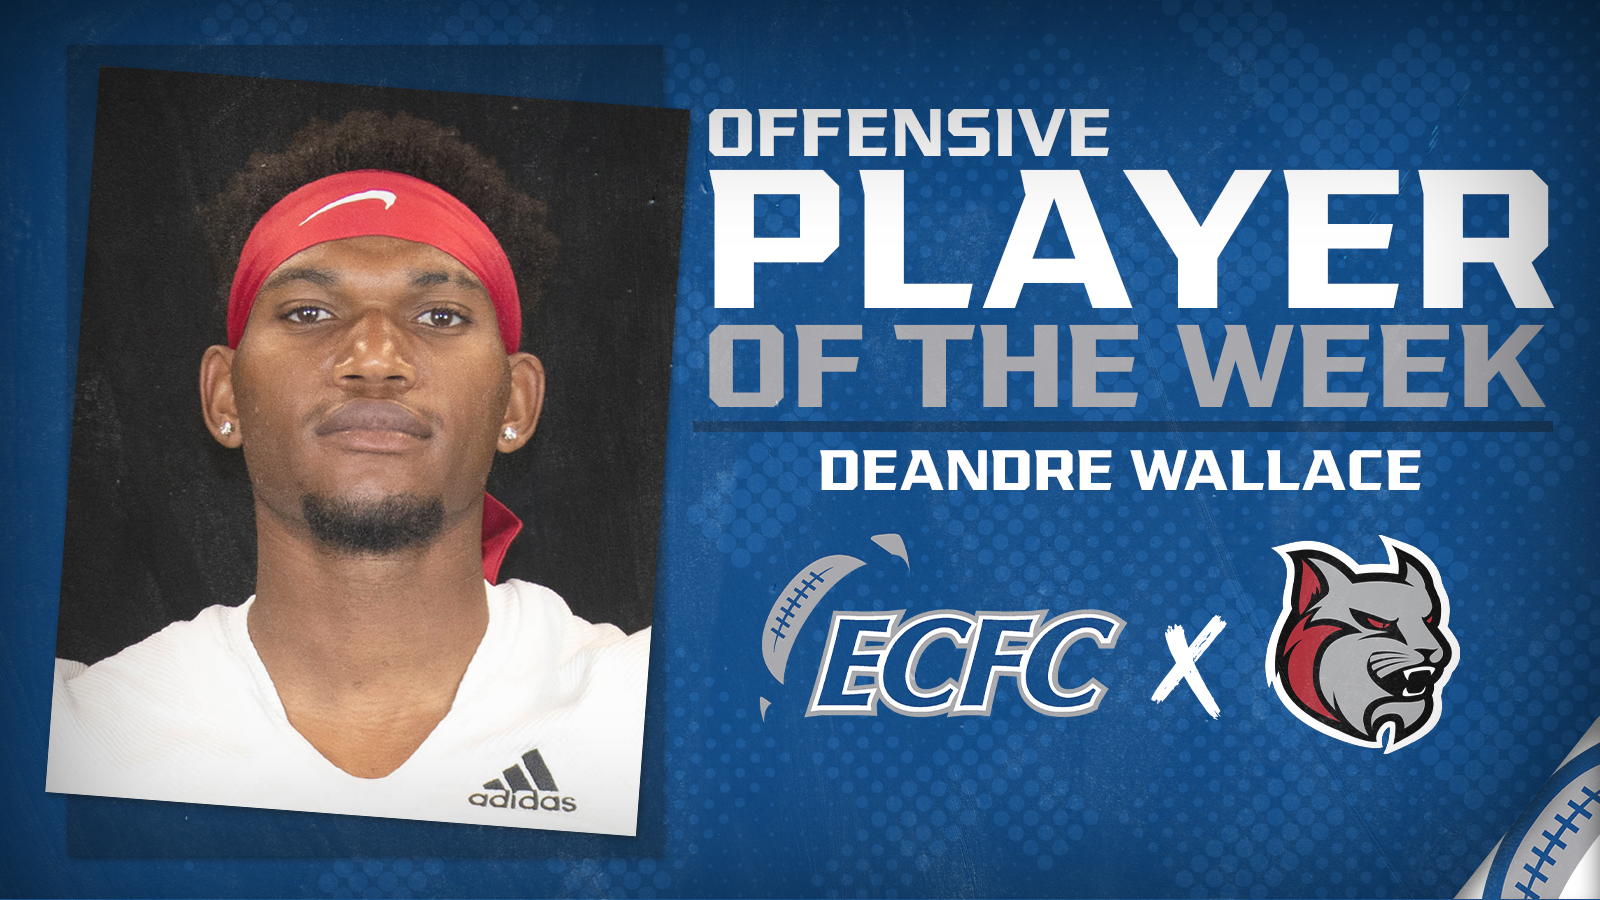 Deandre Wallace Named ECFC Offensive Player Of The Week